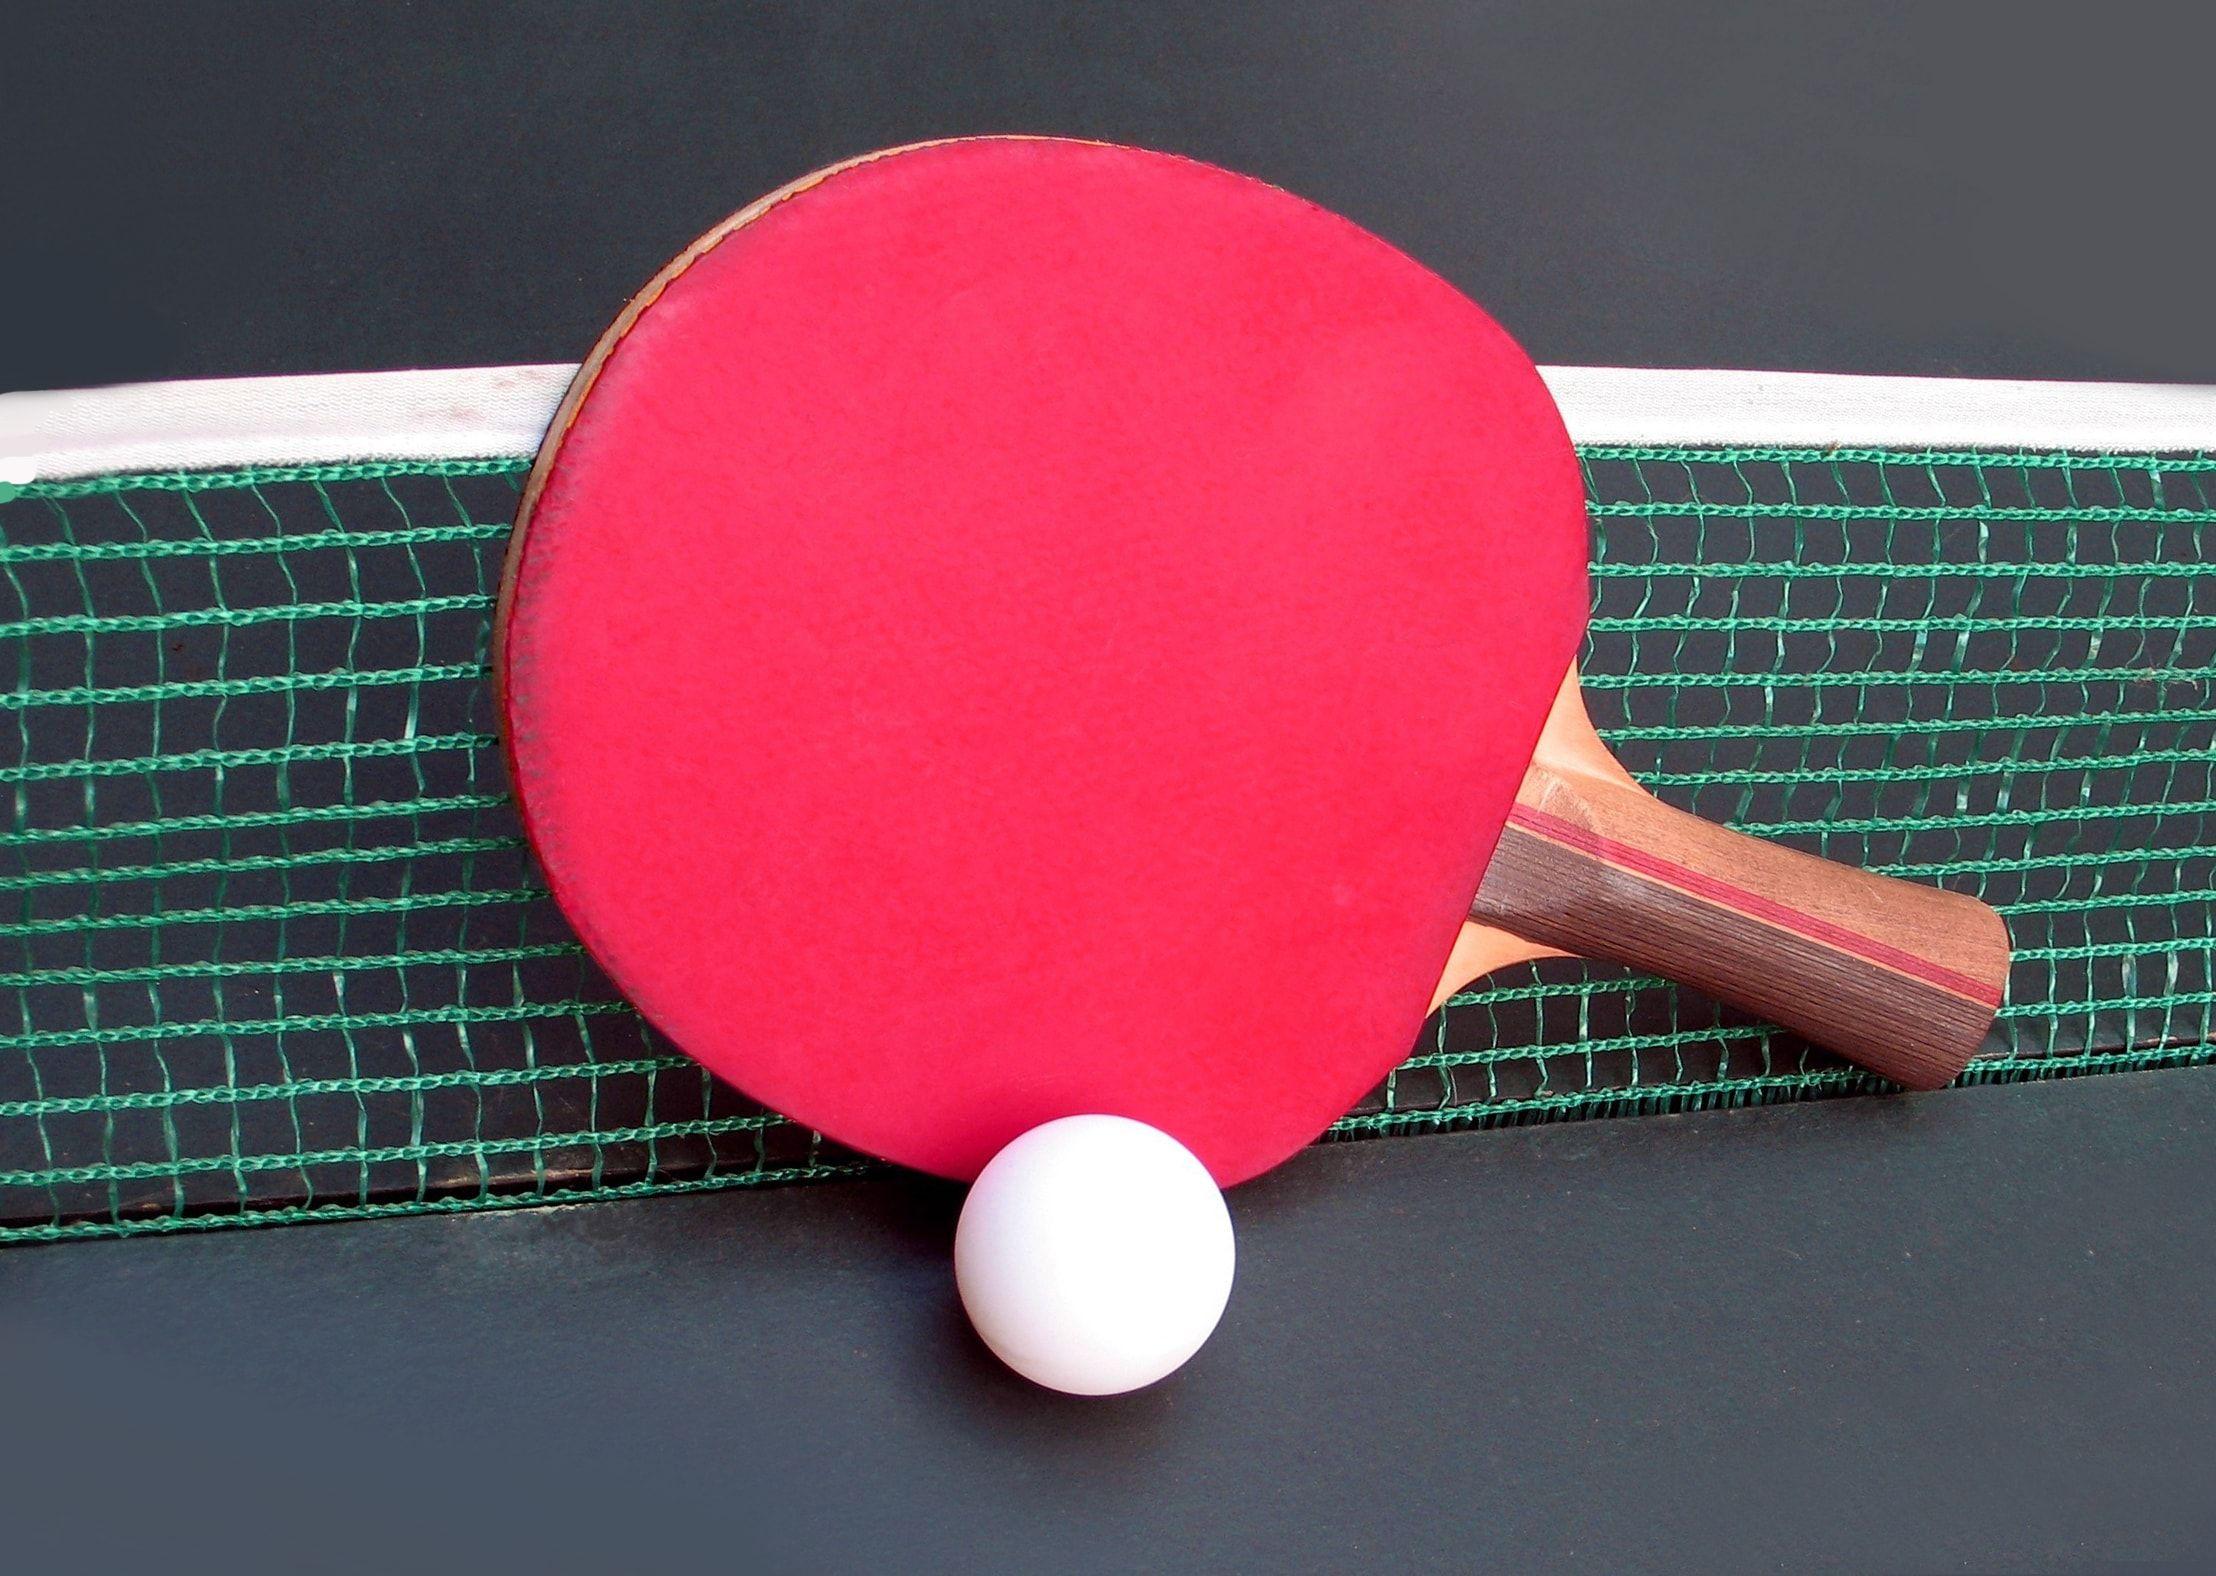 Red racket for table tennis at the net wallpaper and image